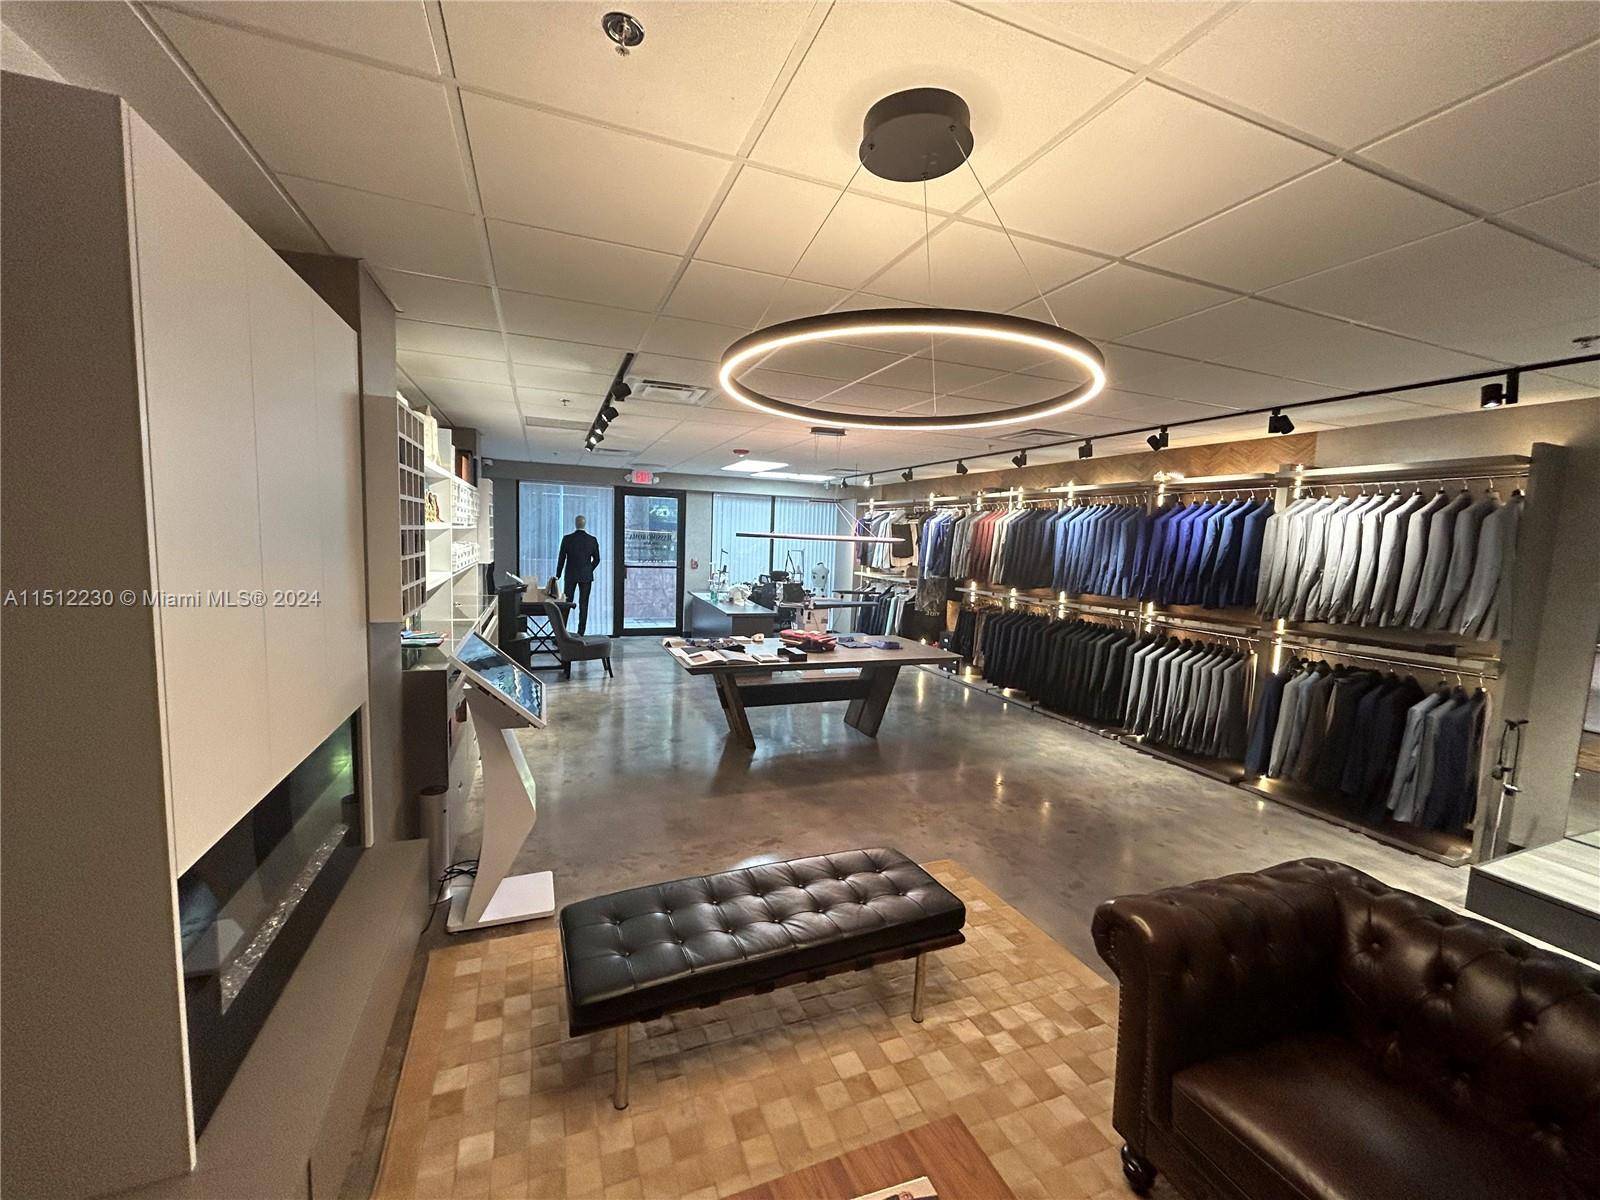 Discover the epitome of Italian elegance with a distinguished menswear business for sale in the bustling heart of Brickell, Miami.